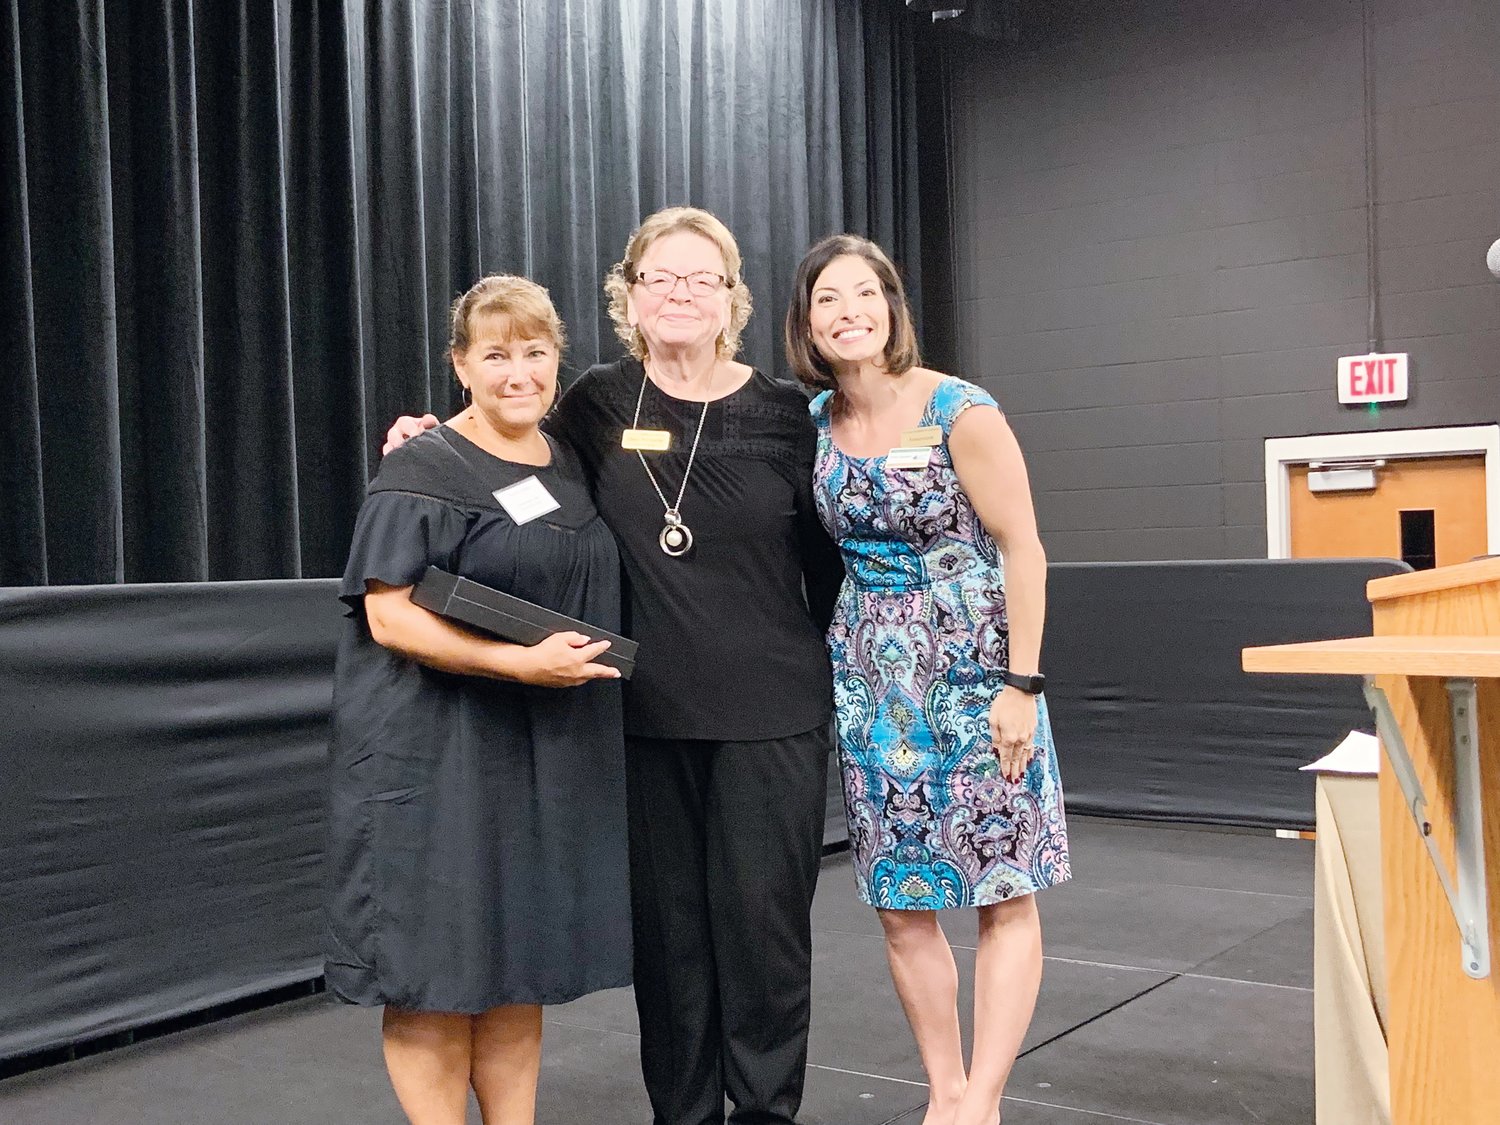 Ronda Stubbs, left, marketing director for Cambridge Hills Assisted Living, receives the award for Chamber Ambassador of the Year, presented by Cindy Poindexter of the Chatham Chamber, middle, and Erica Sanders, at the Chatham Chamber of Commerce’s Annual Meeting last week in Pittsboro.